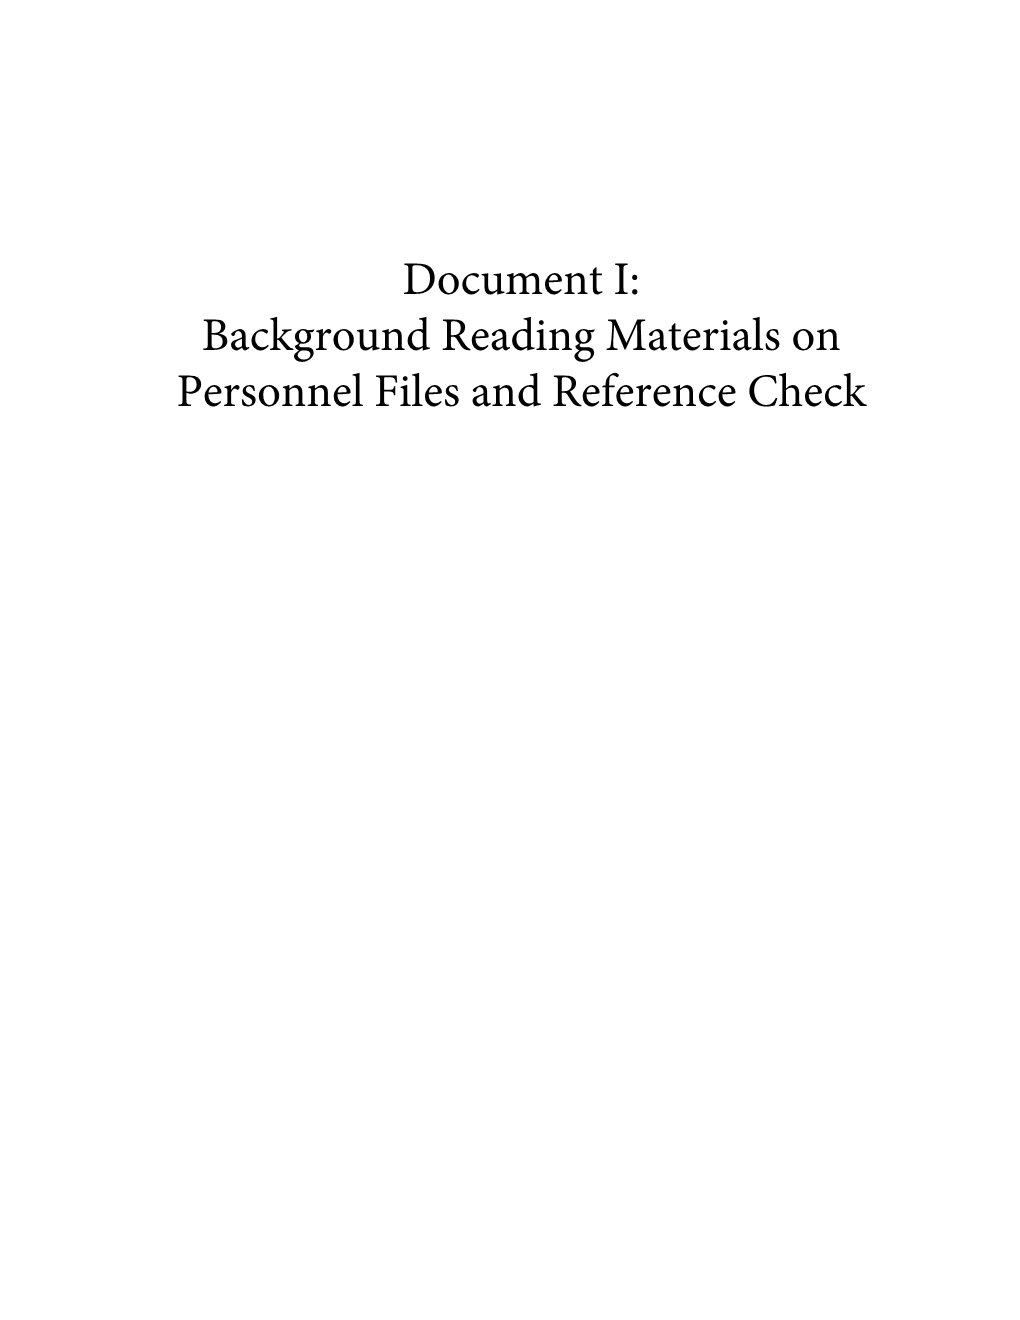 Background Reading Materials on Personnel Files and Reference Check Personnel File & Reference Check Policies – Background Reading Materials